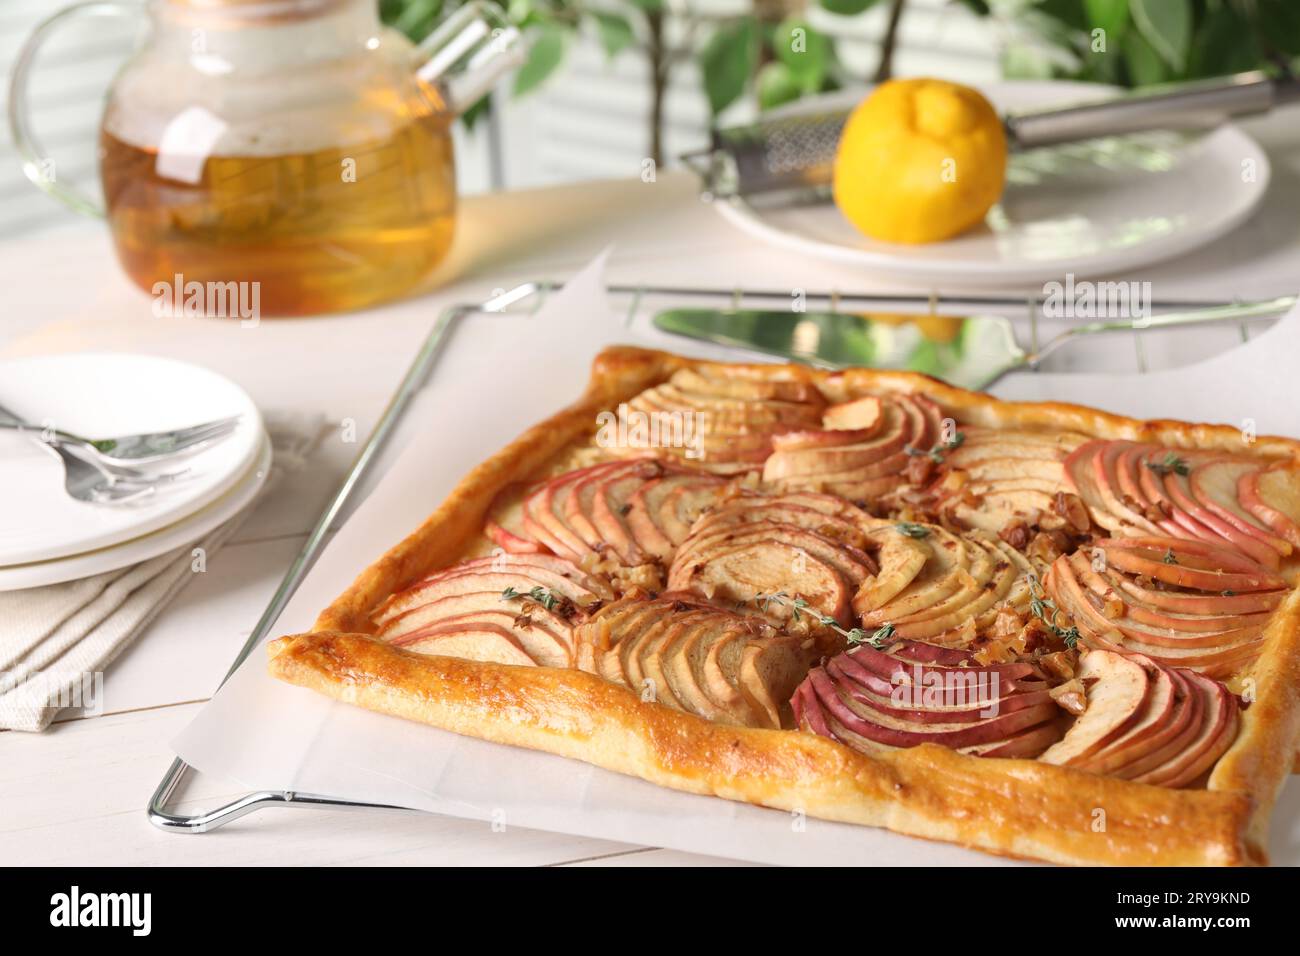 Freshly baked apple pie served on white wooden table Stock Photo